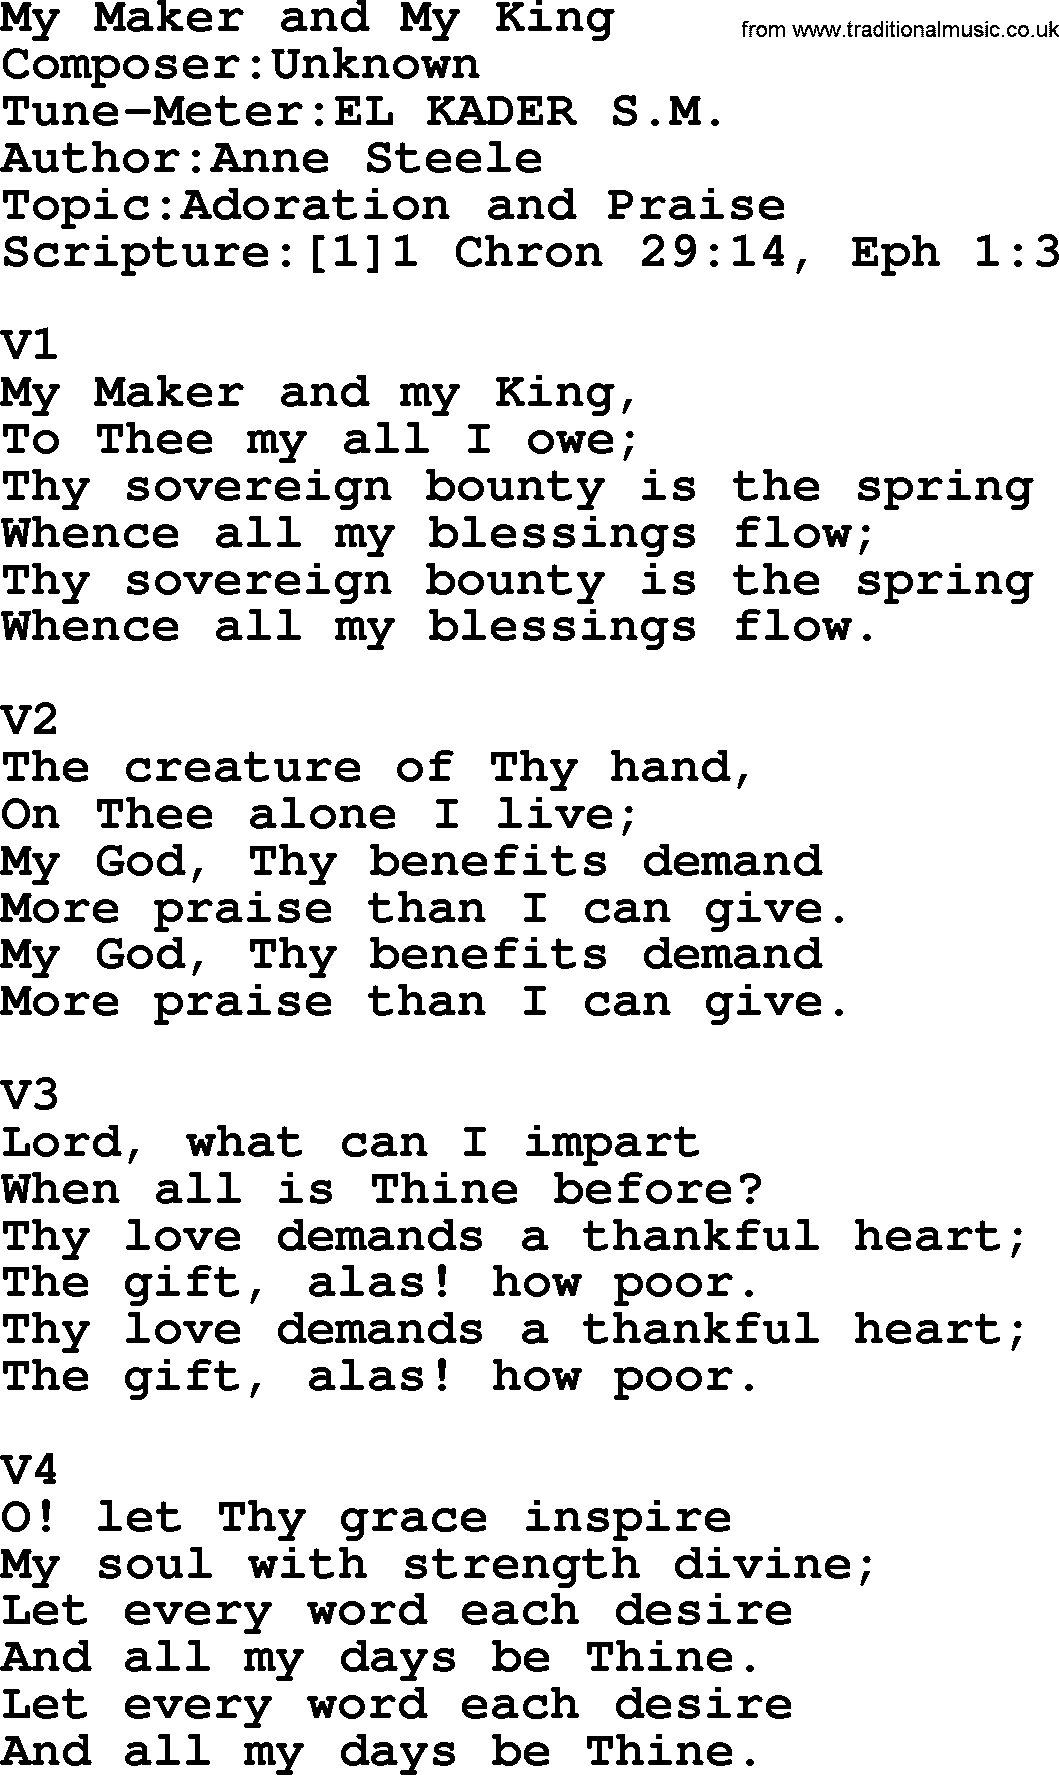 Adventist Hynms collection, Hymn: My Maker And My King, lyrics with PDF